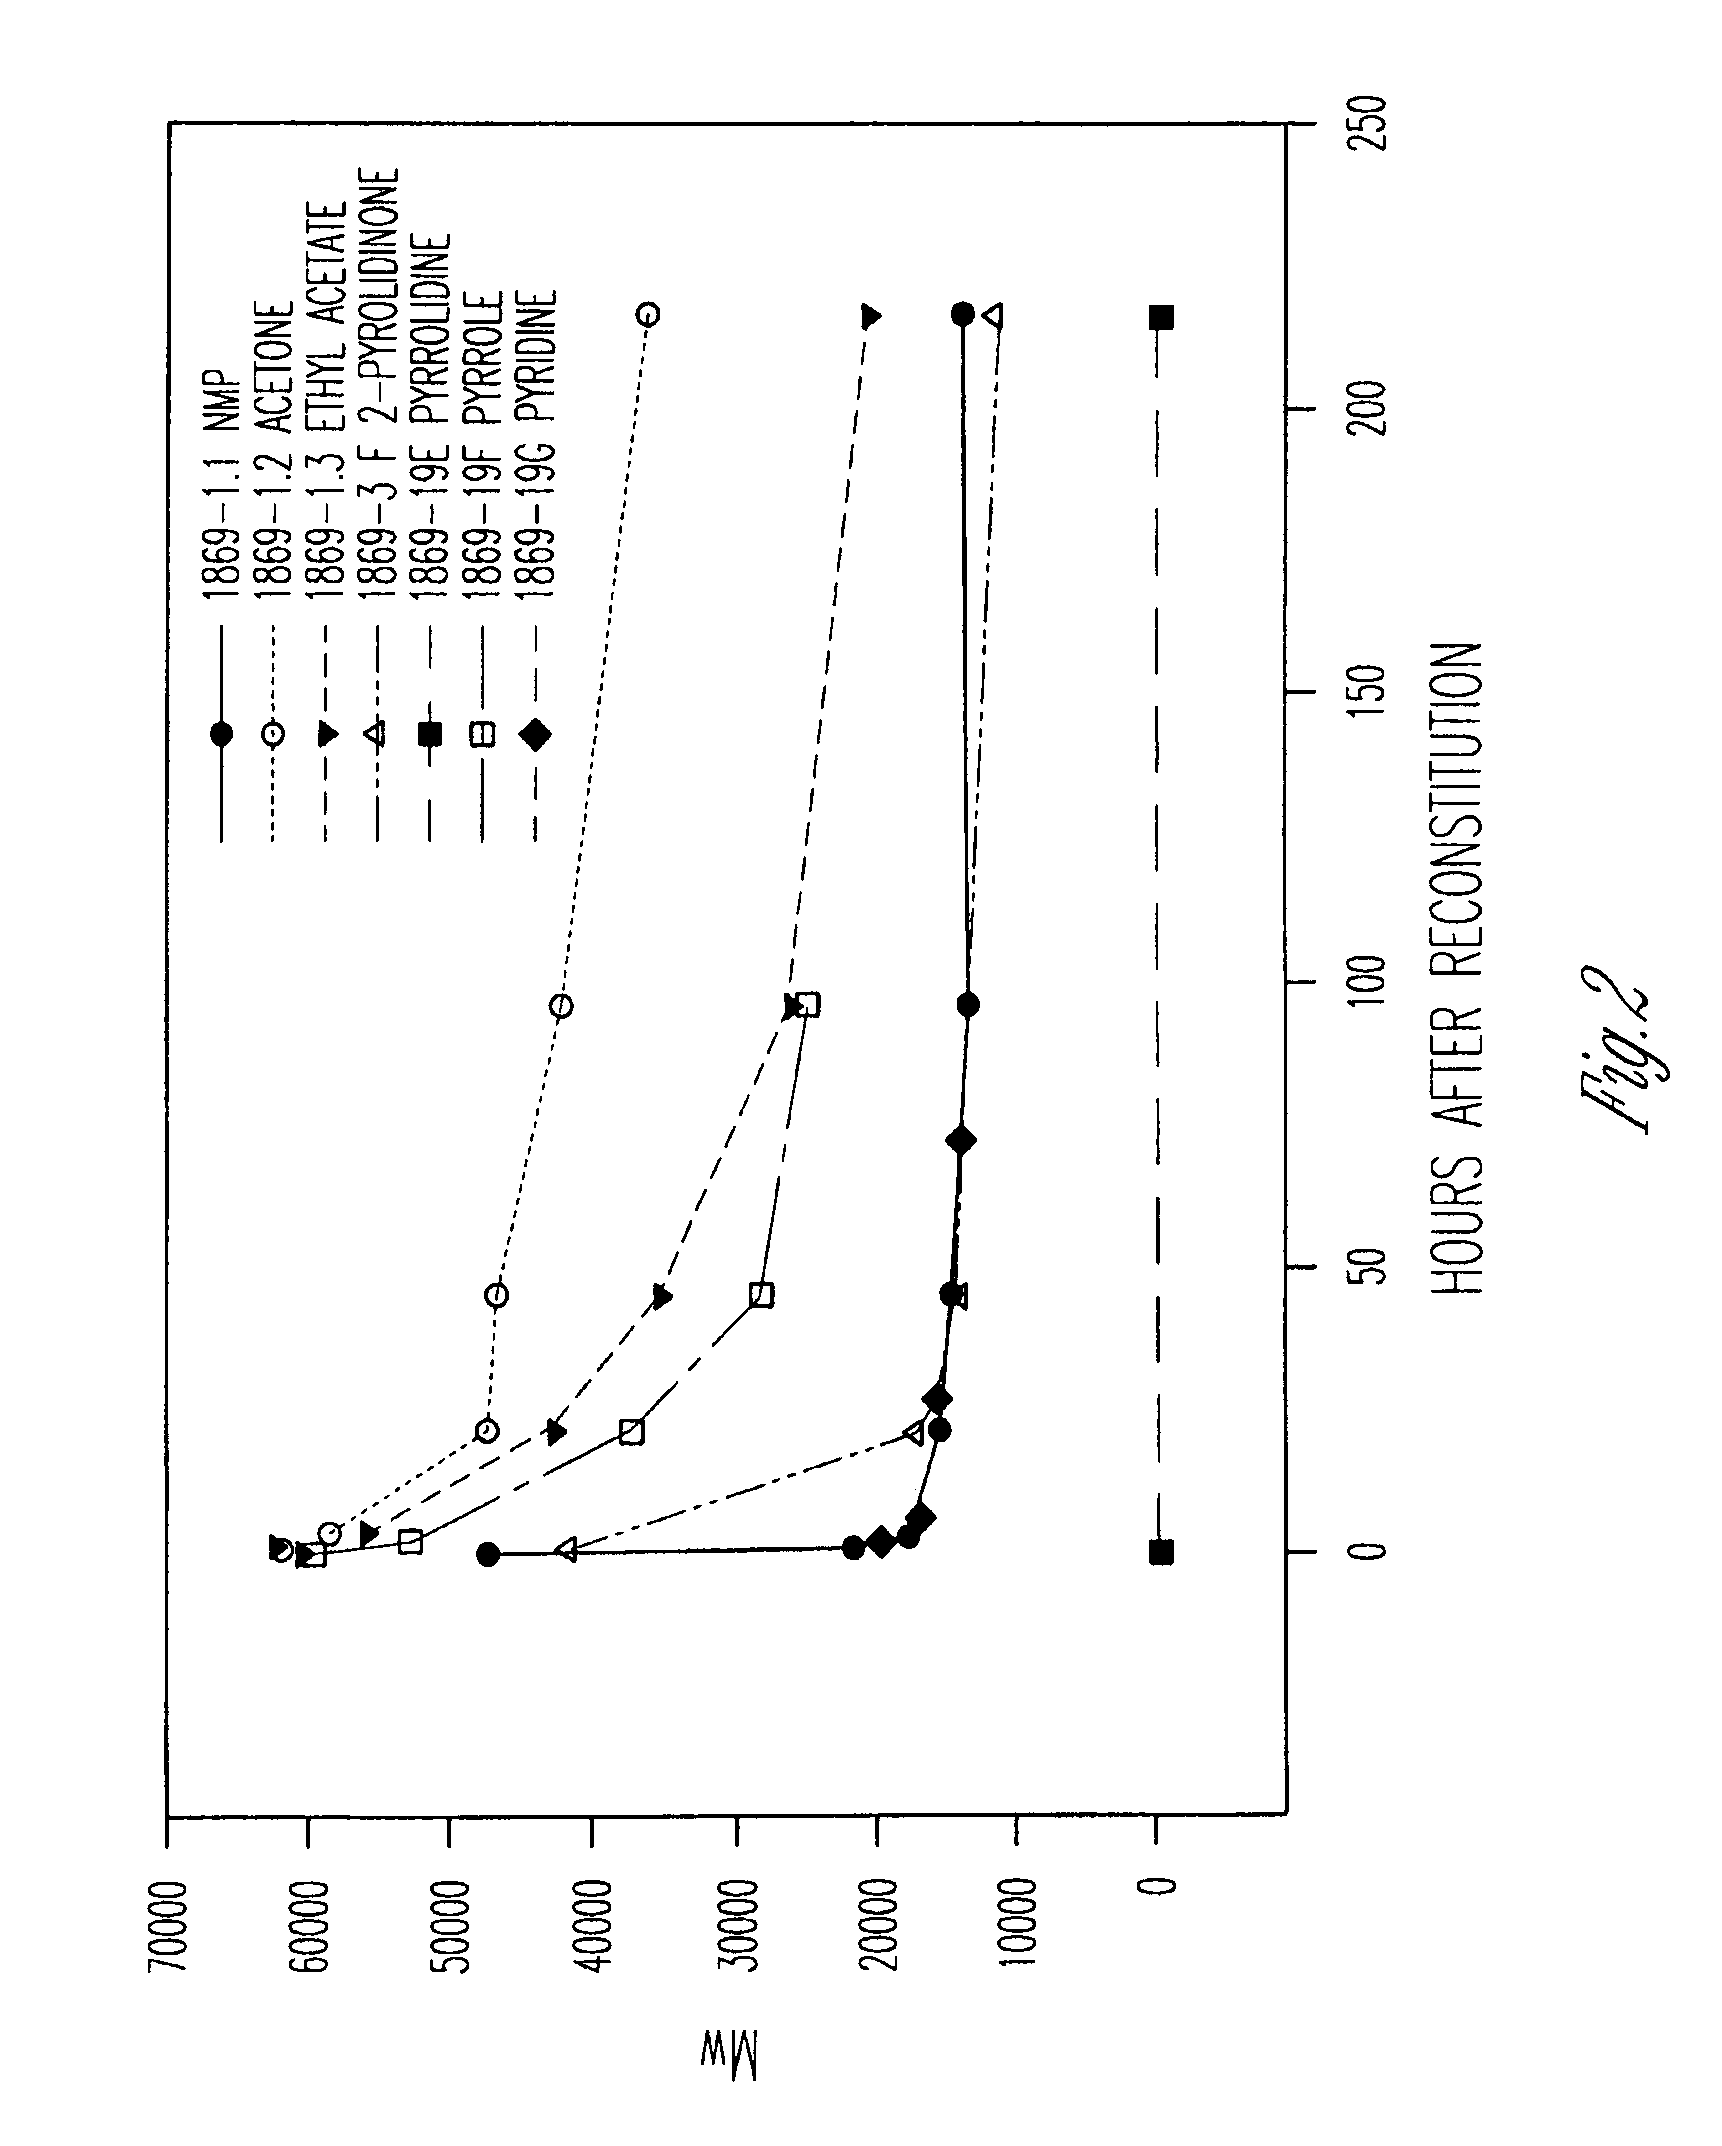 Stabilized polymeric delivery system comprising a water-insoluble polymer and an organic liquid